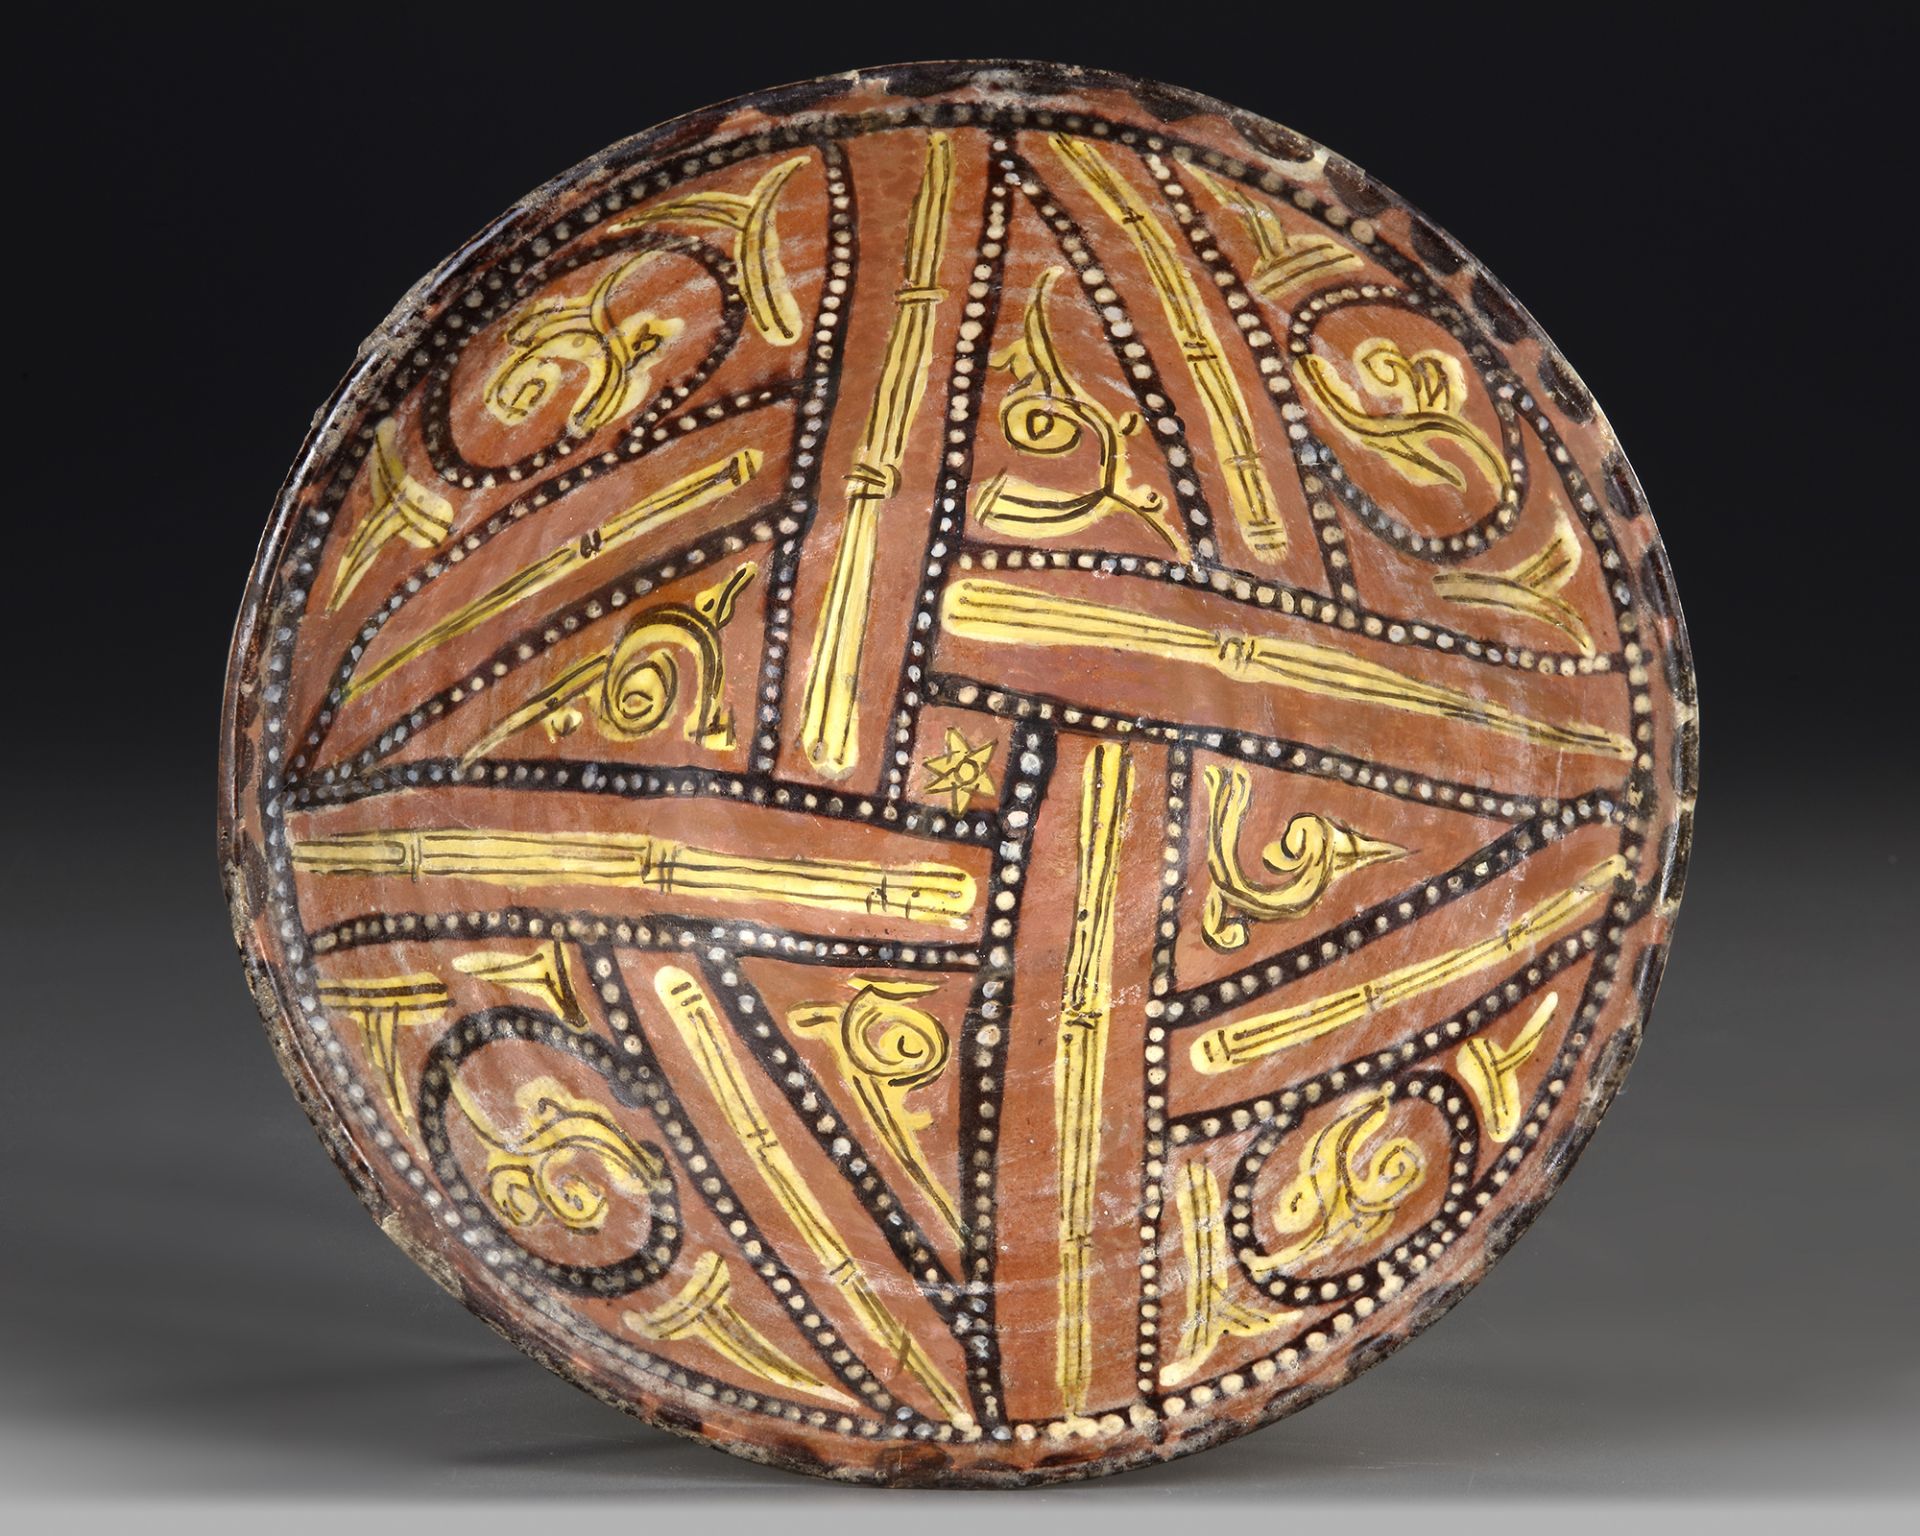 A NISHAPUR CONICAL POTTERY BOWL, PERSIA, 10TH CENTURY - Image 2 of 10